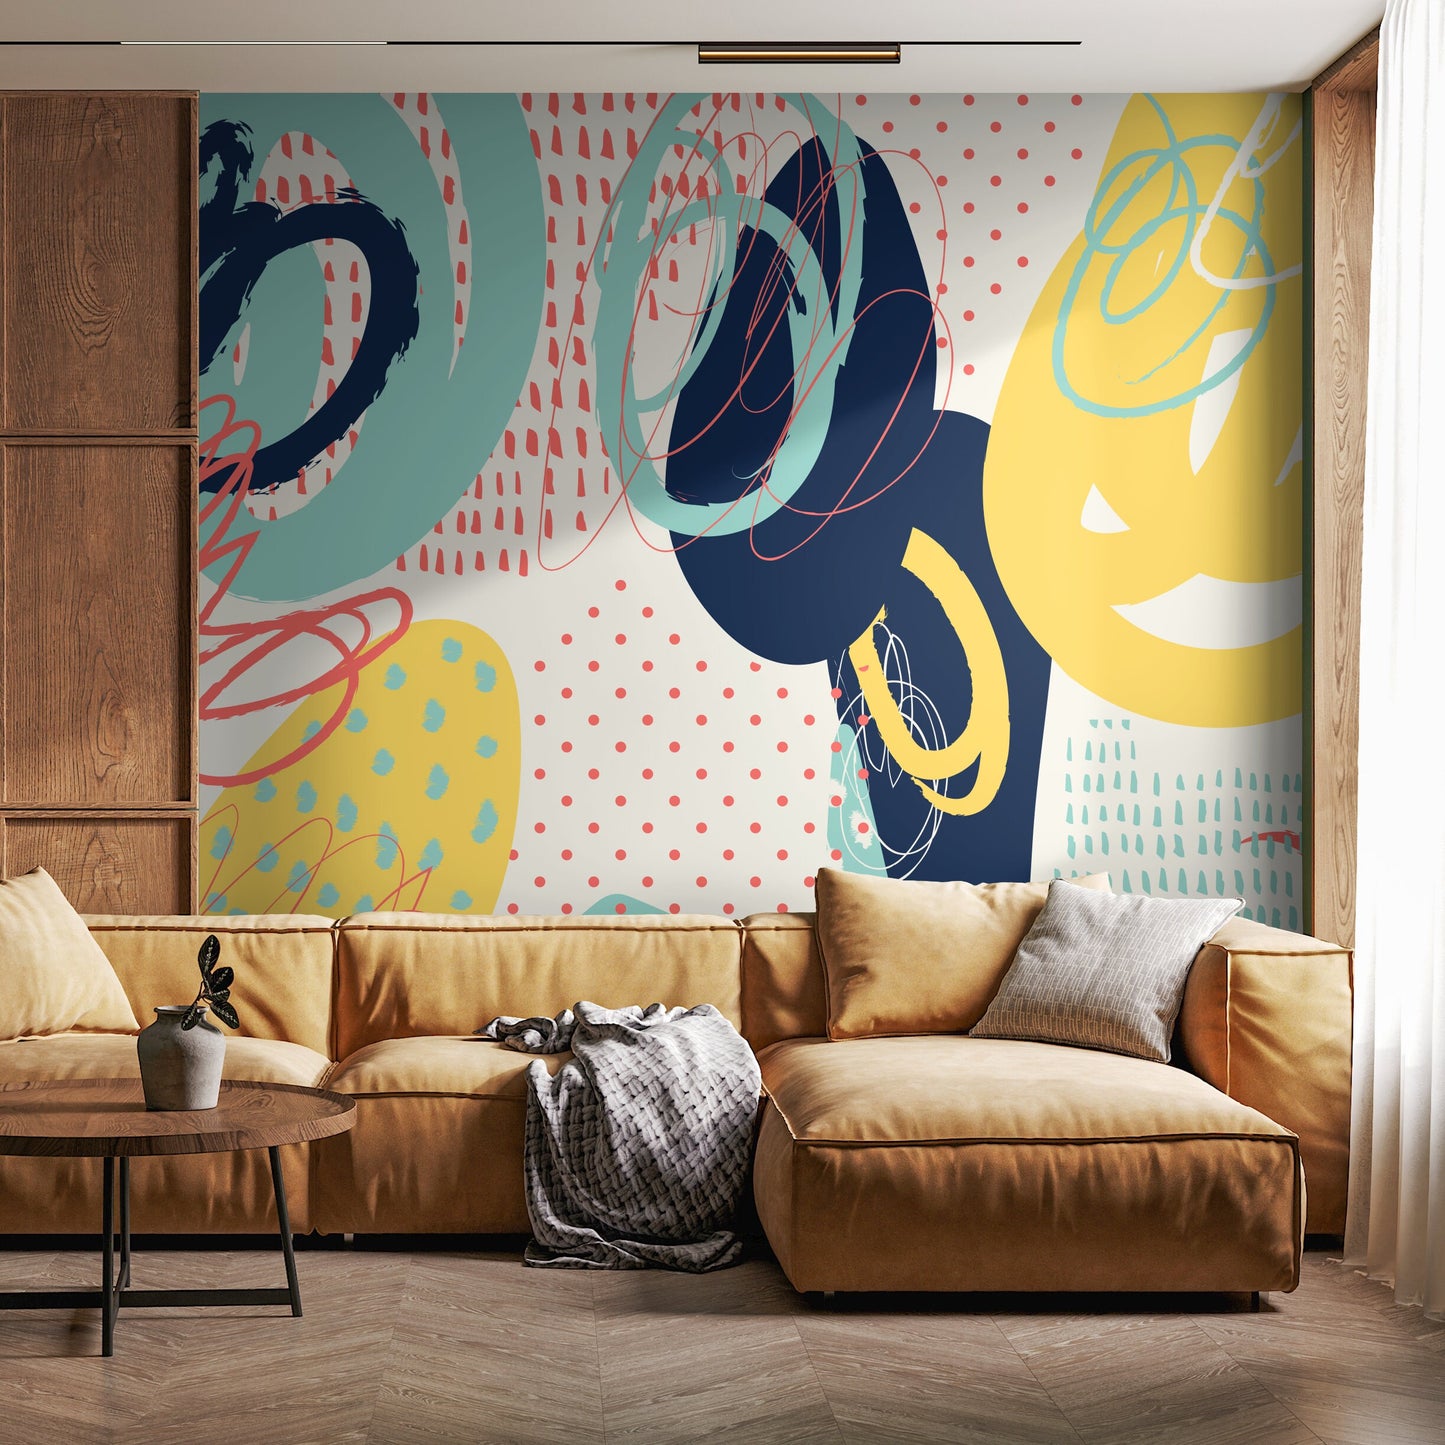 Wallpaper Peel and Stick Wallpaper Removable Wallpaper Home Decor Wall Art Wall Decor Room Decor / Colorful Abstract Modern Wallpaper - A745